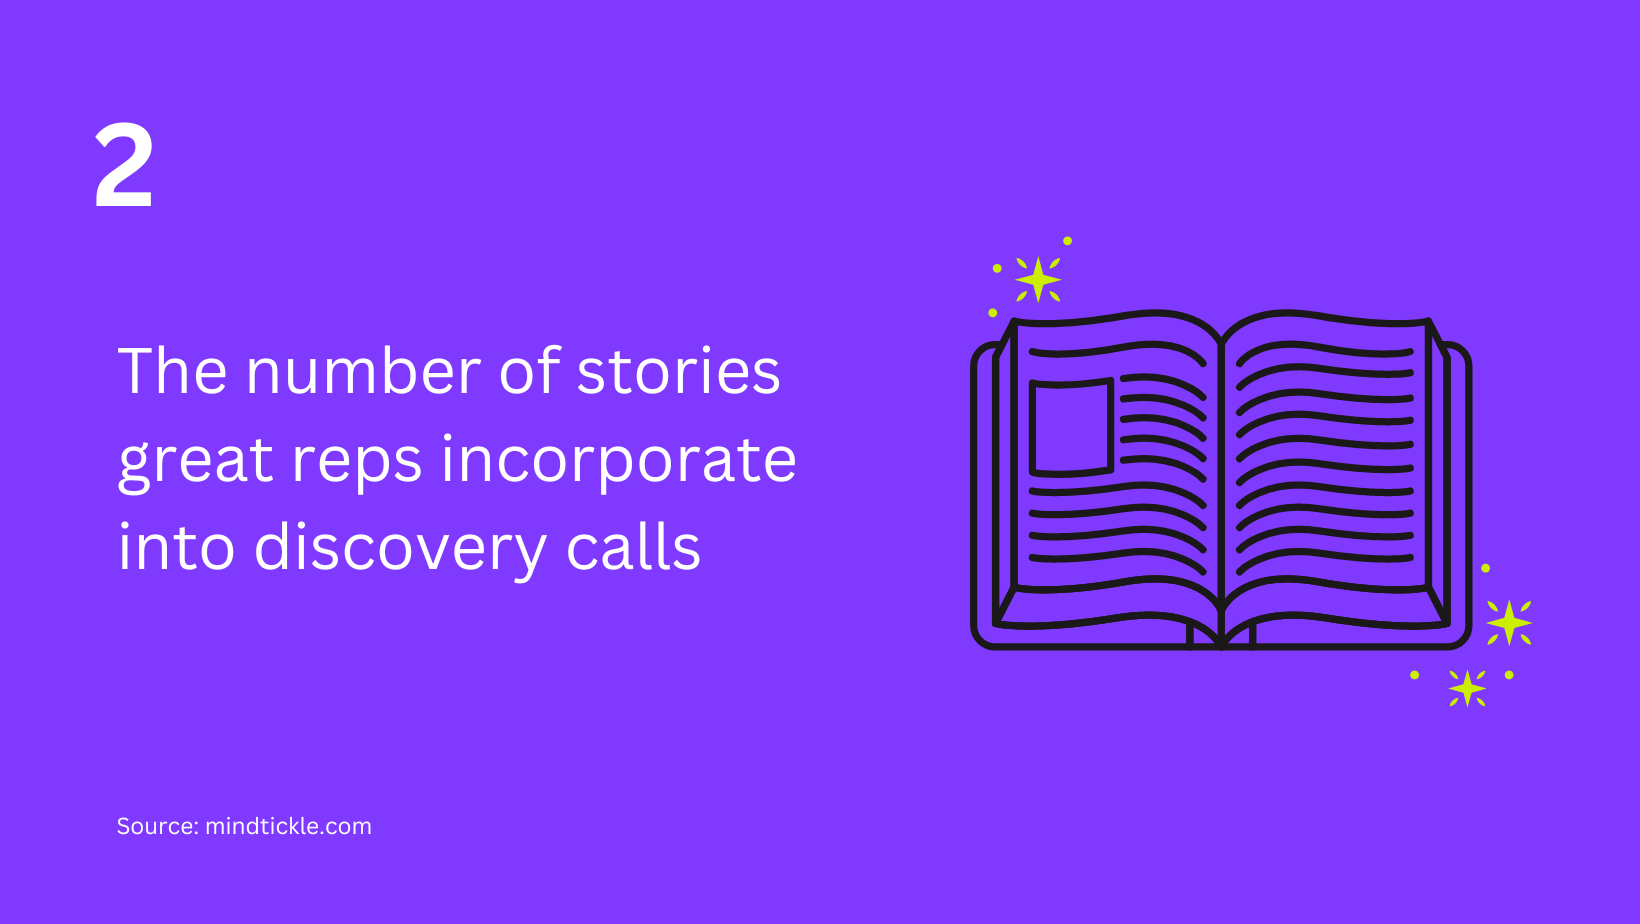 How many stories to include into discovery calls